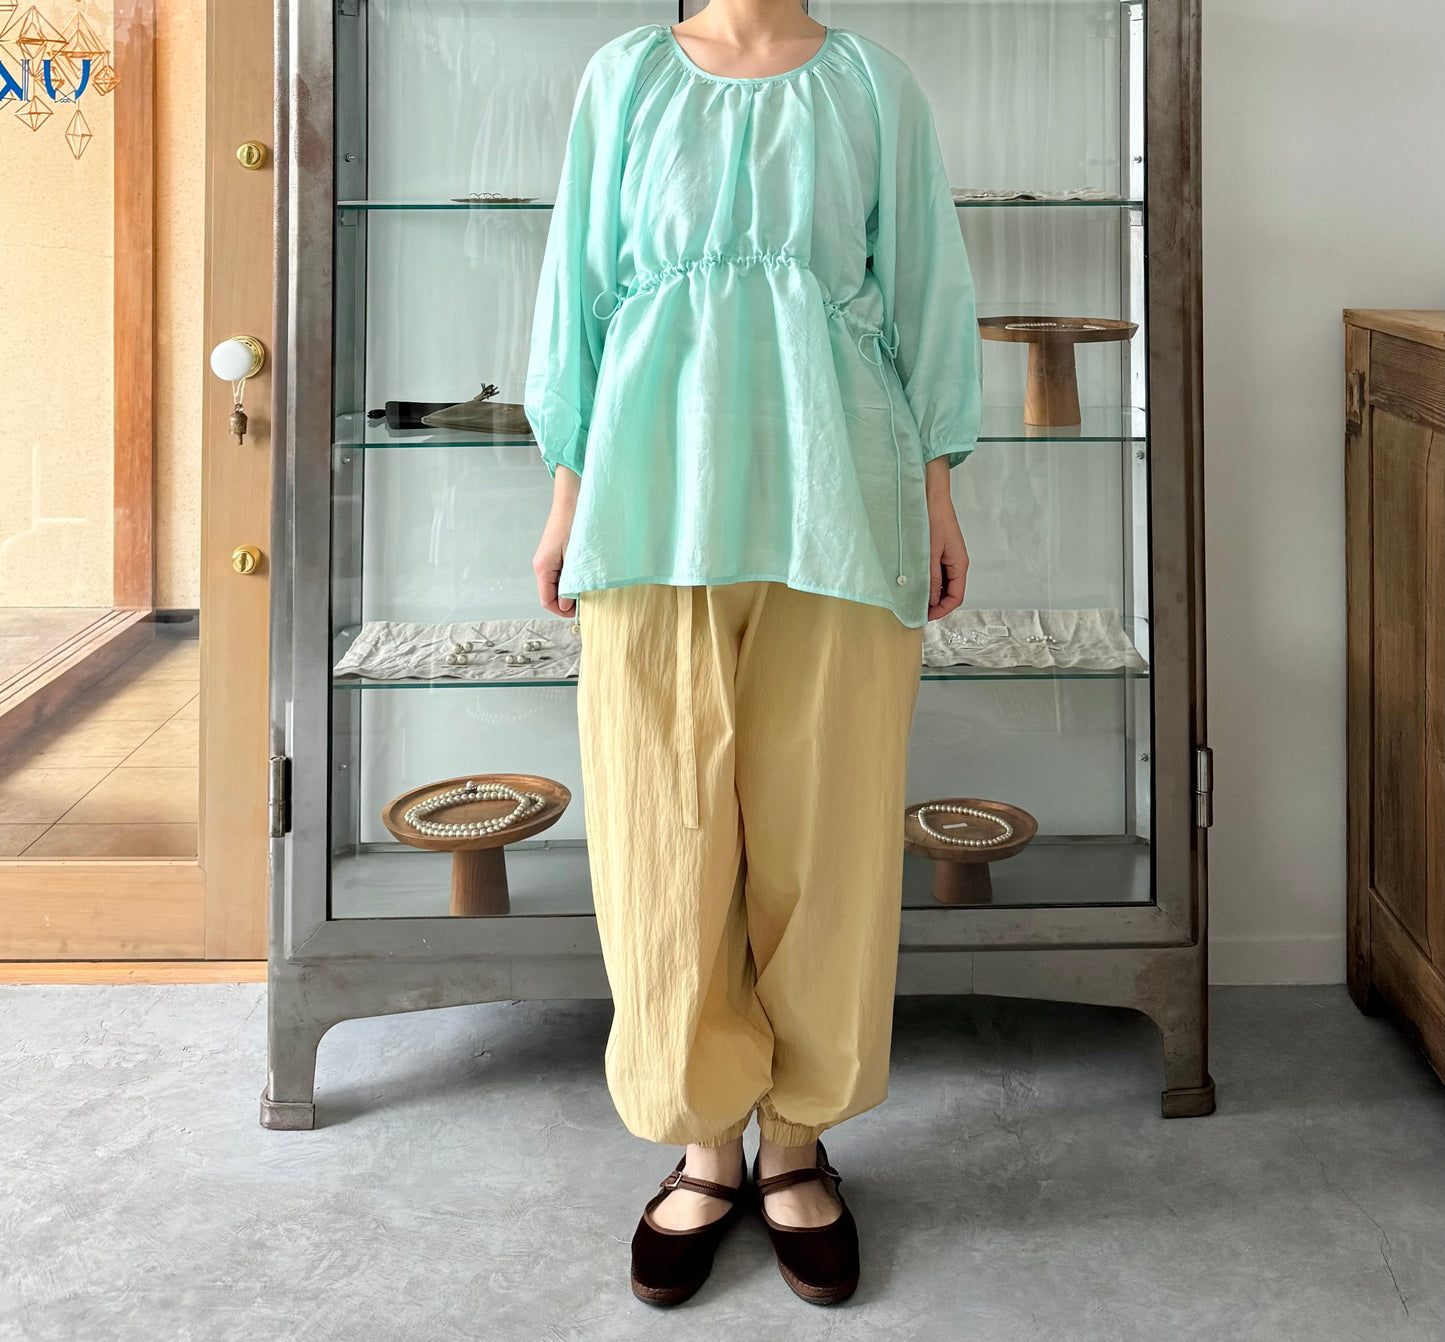 Back Button Blouse　BUNON 　シルクブラウス　通販　取扱店